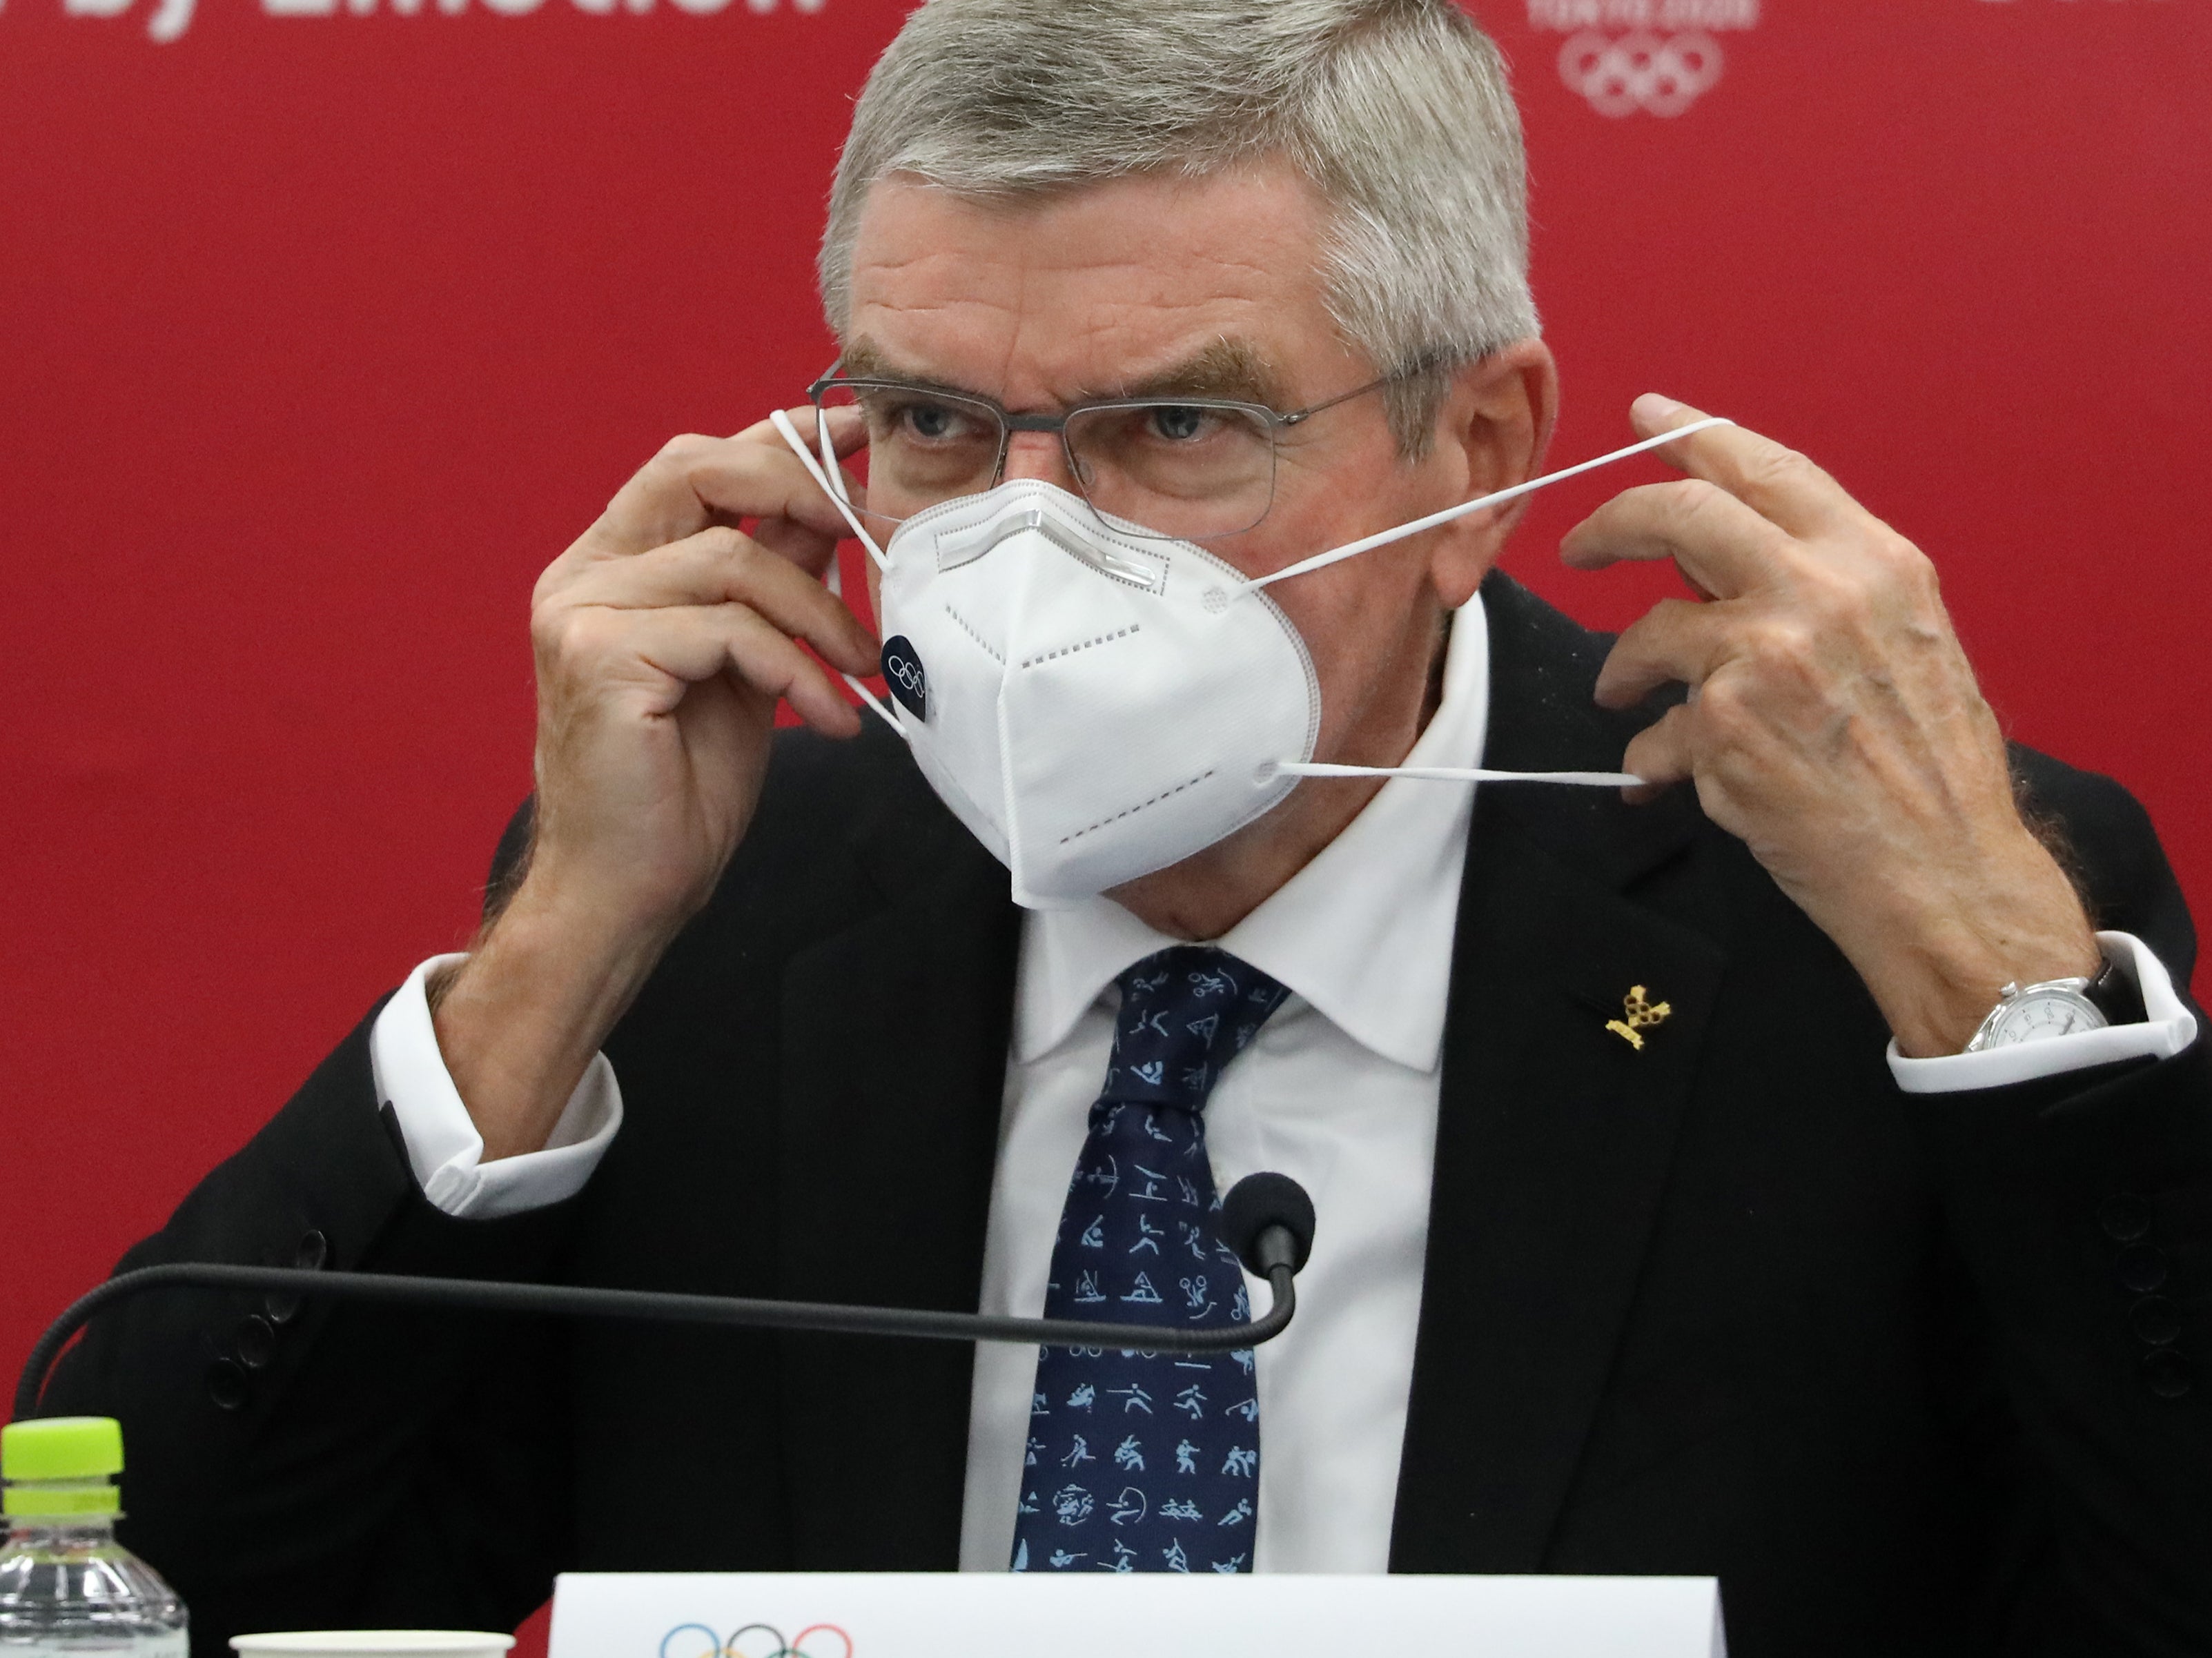 IOC president Thomas Bach in Tokyo ahead of next summer’s Olympic Games